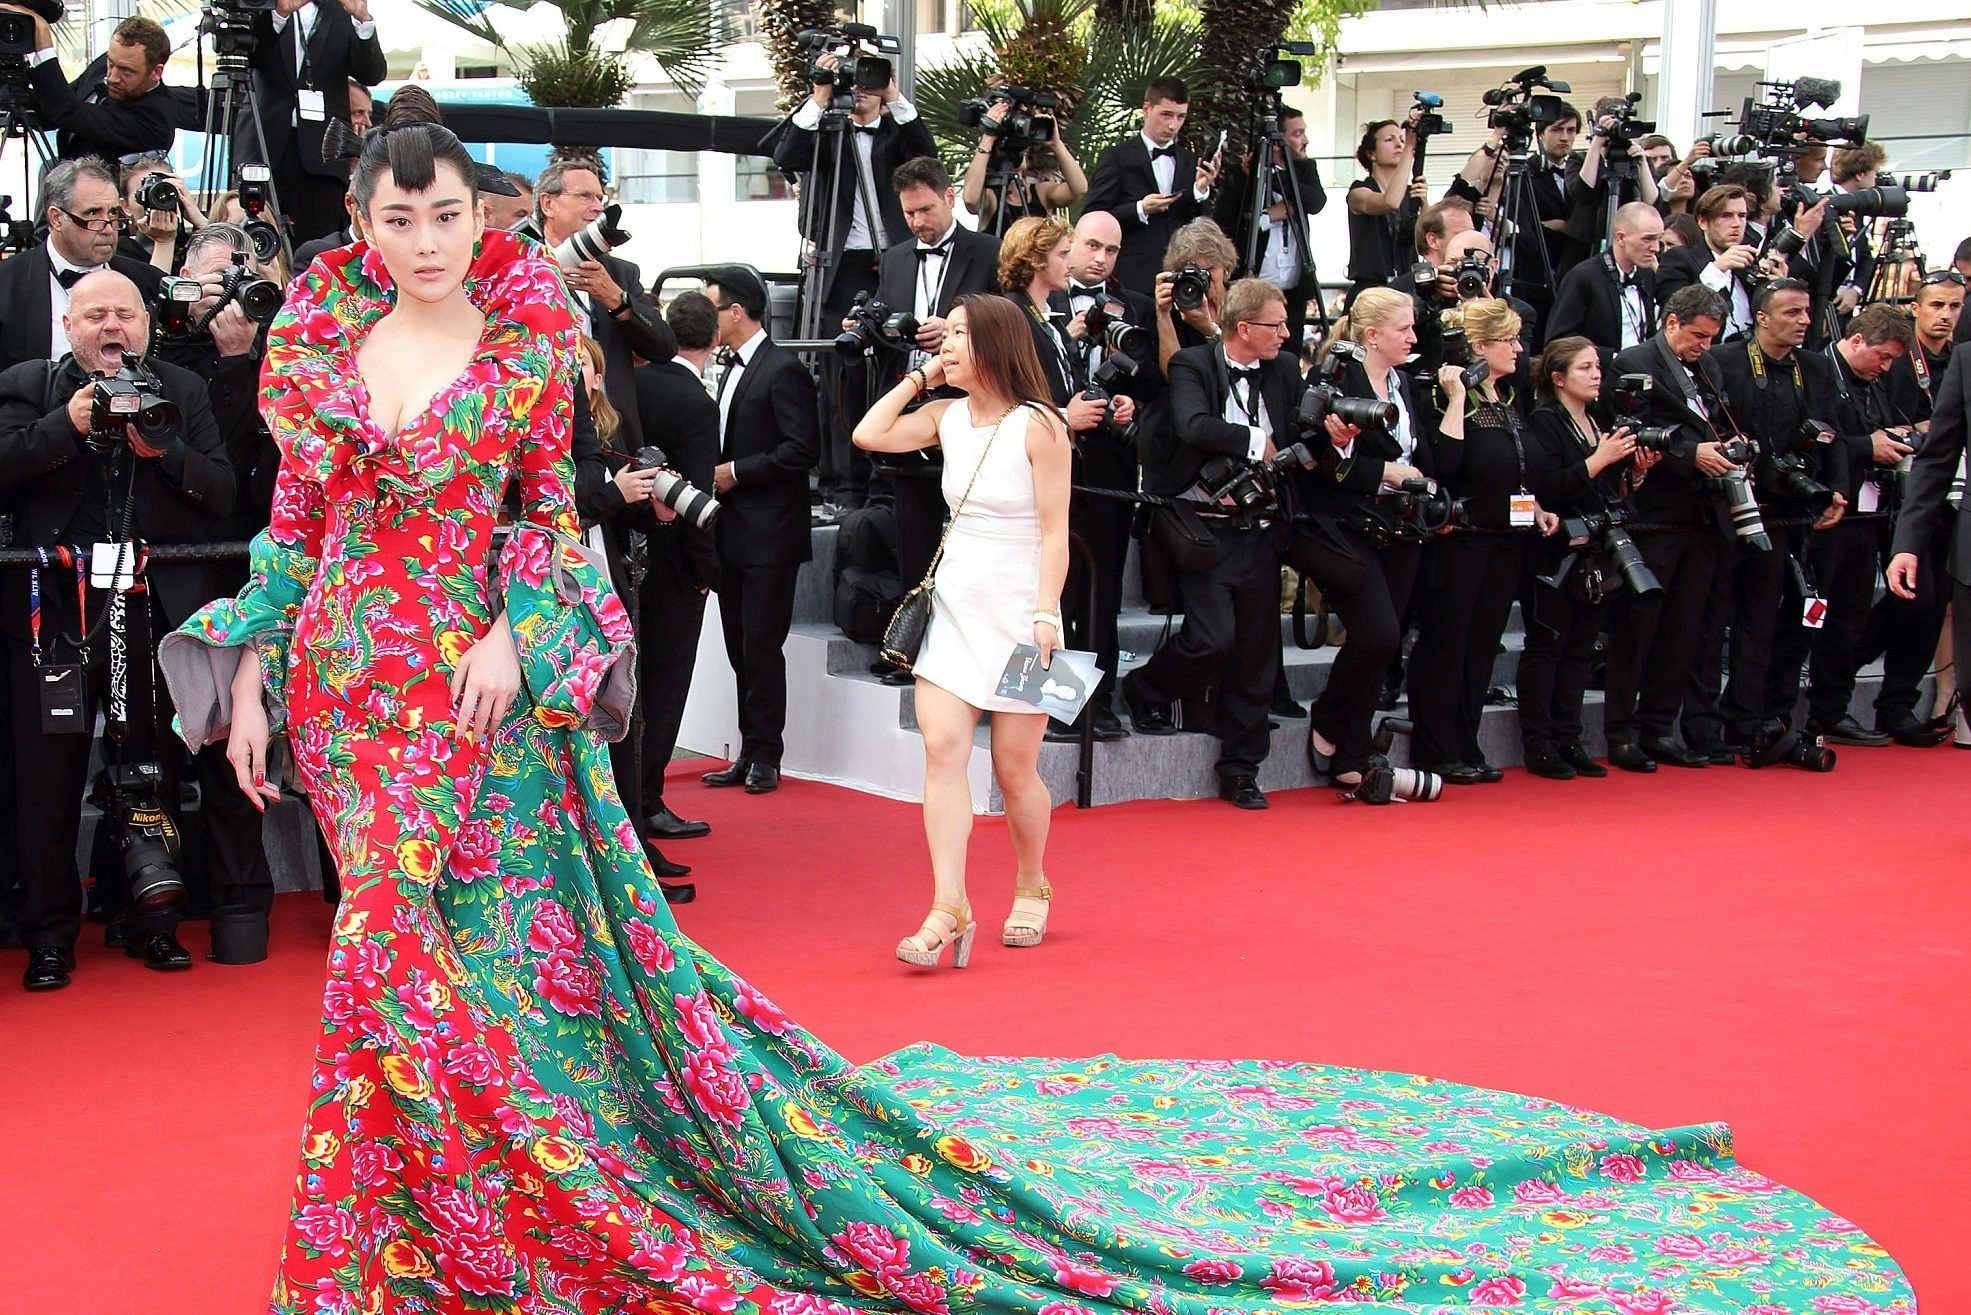 Zhang Xinyu attends the opening ceremony and premiere of "La Tete Haute ("Standing Tall") during the 68th annual Cannes Film Festival on May 13, 2015 in Cannes, France.